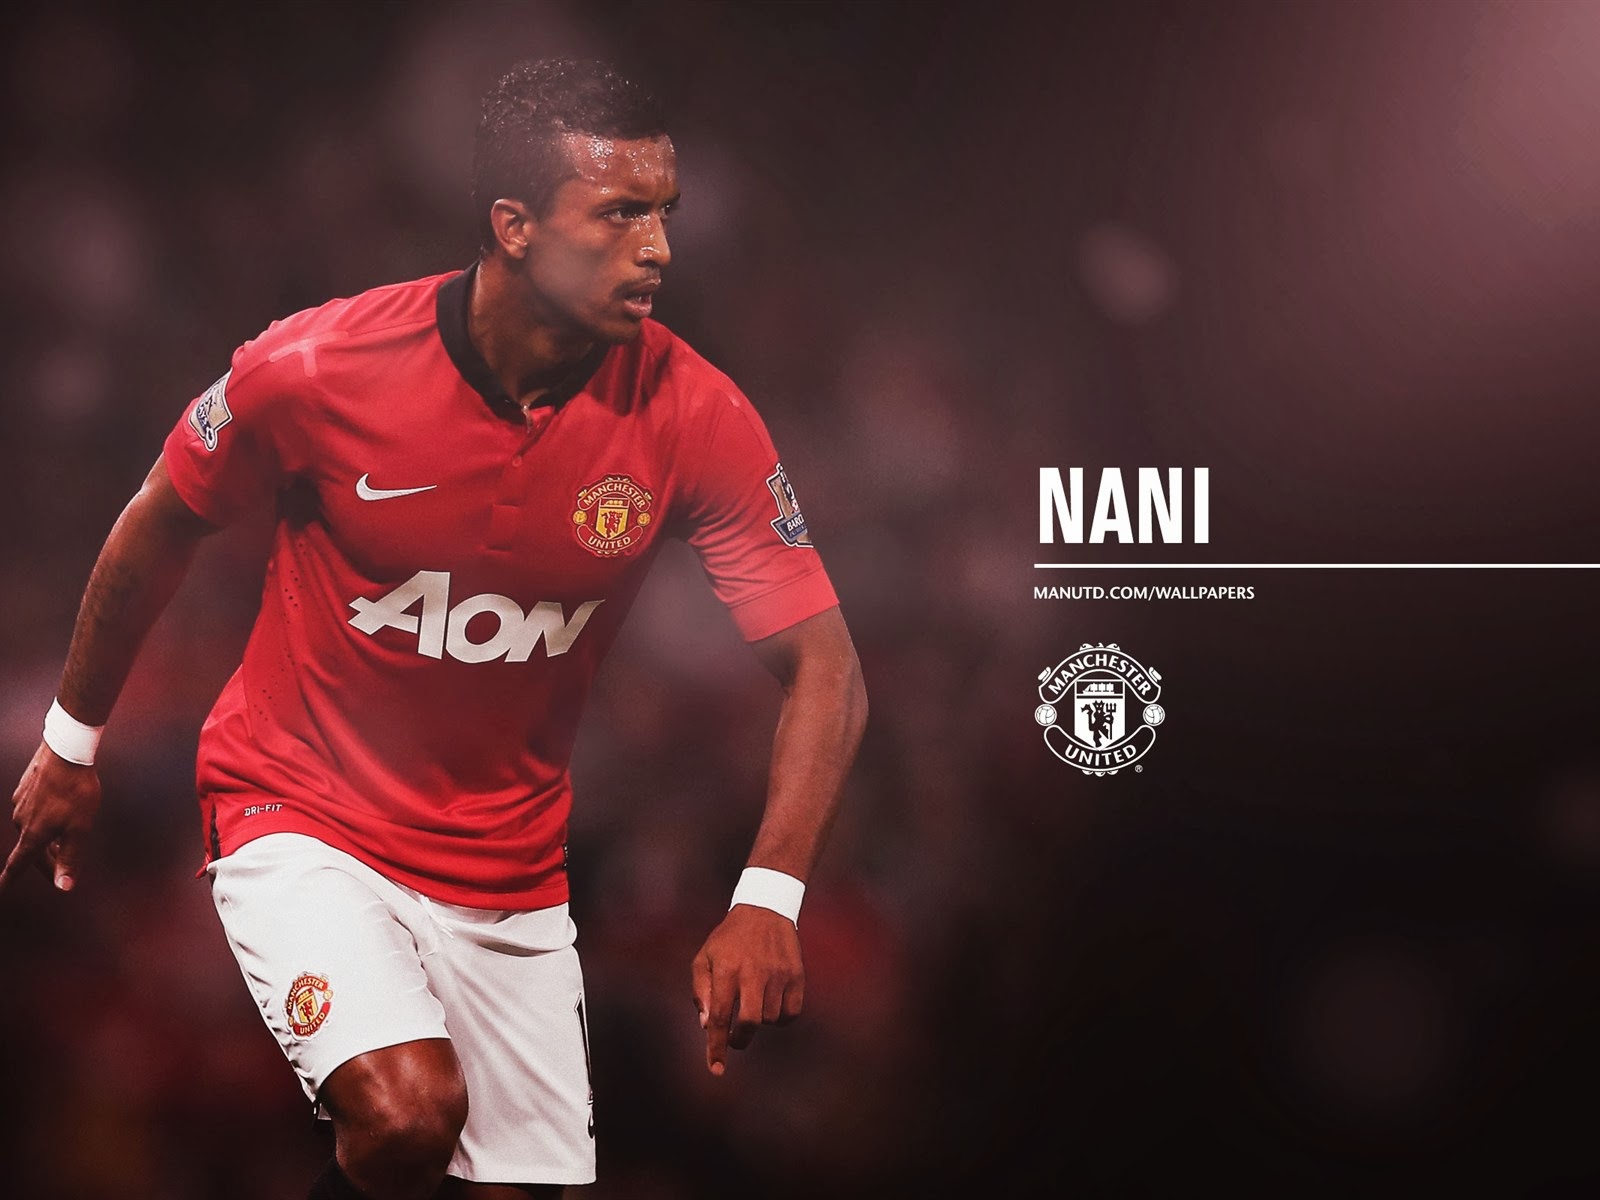 Daftar Pemain Skuad Manchester United 2013 2014 Part2Manchester